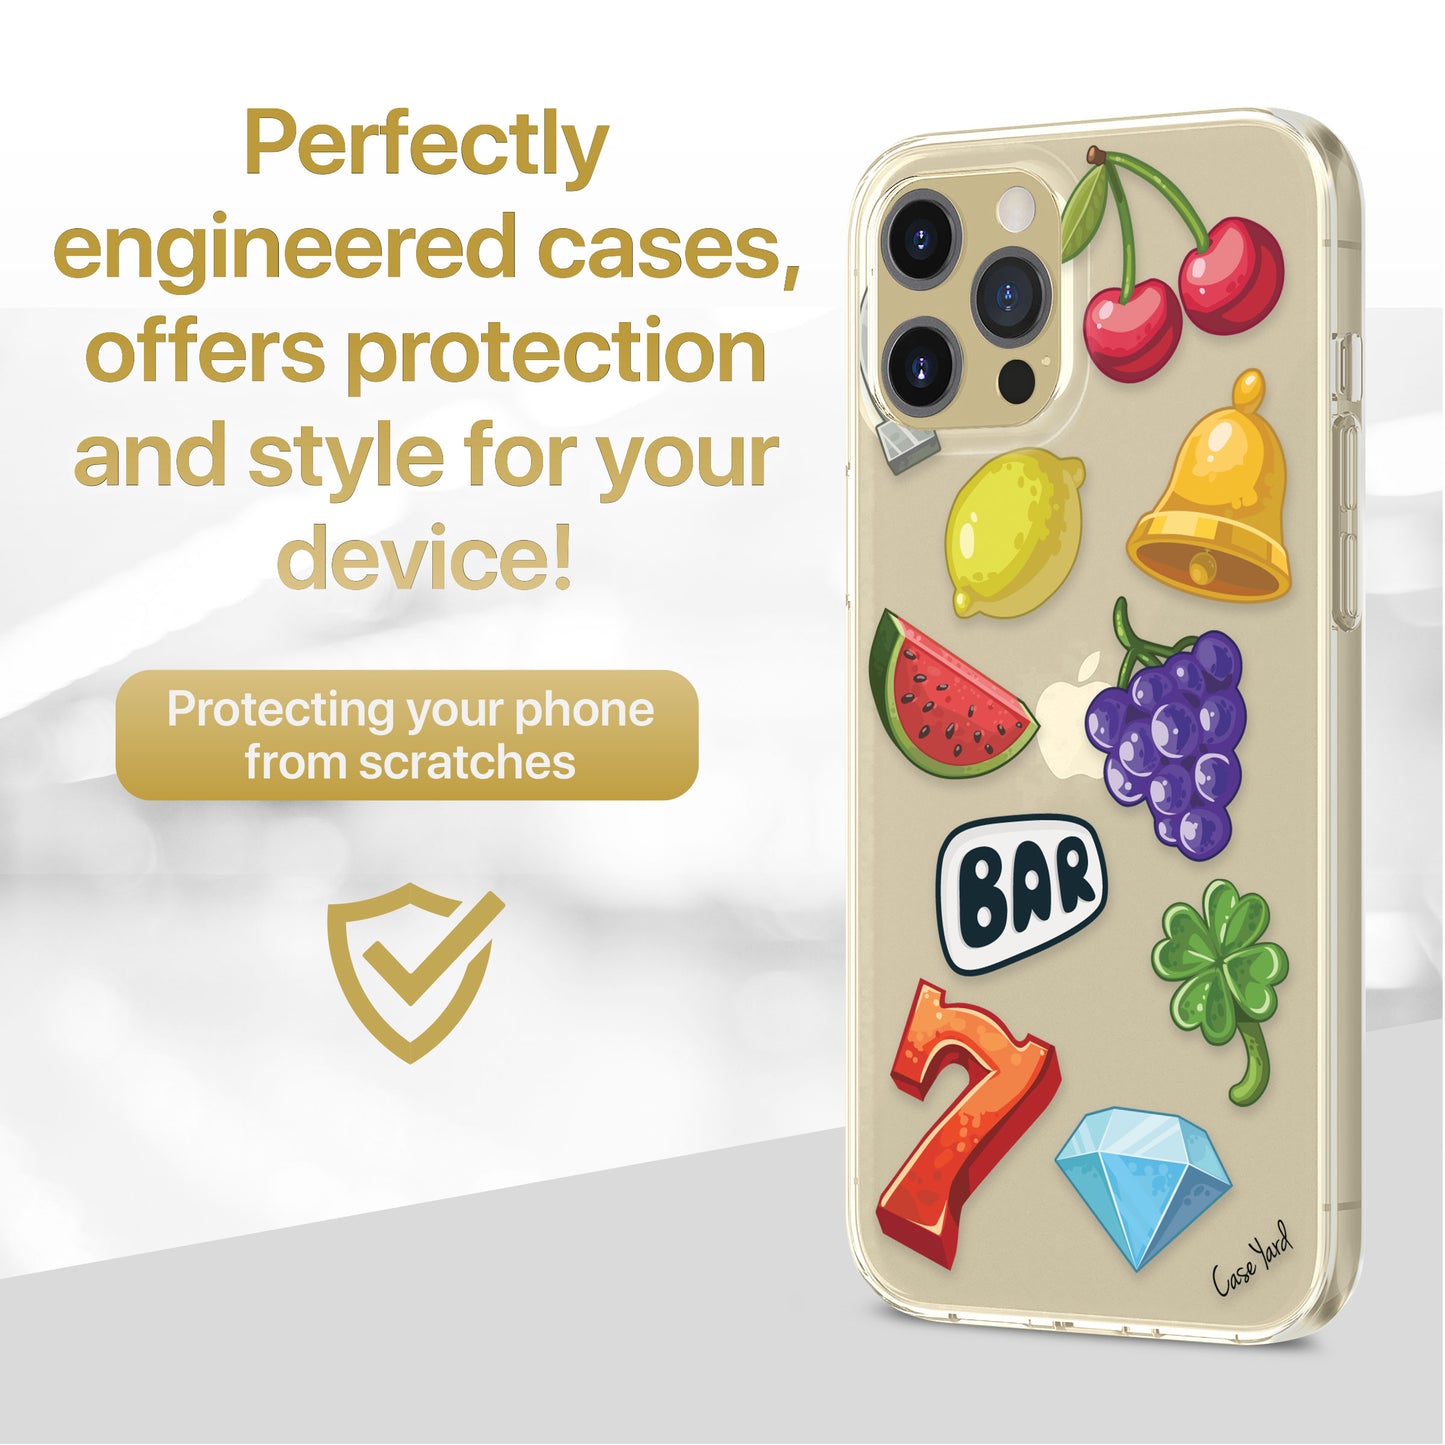 TPU Clear case with (Slot Machine) Design for iPhone & Samsung Phones